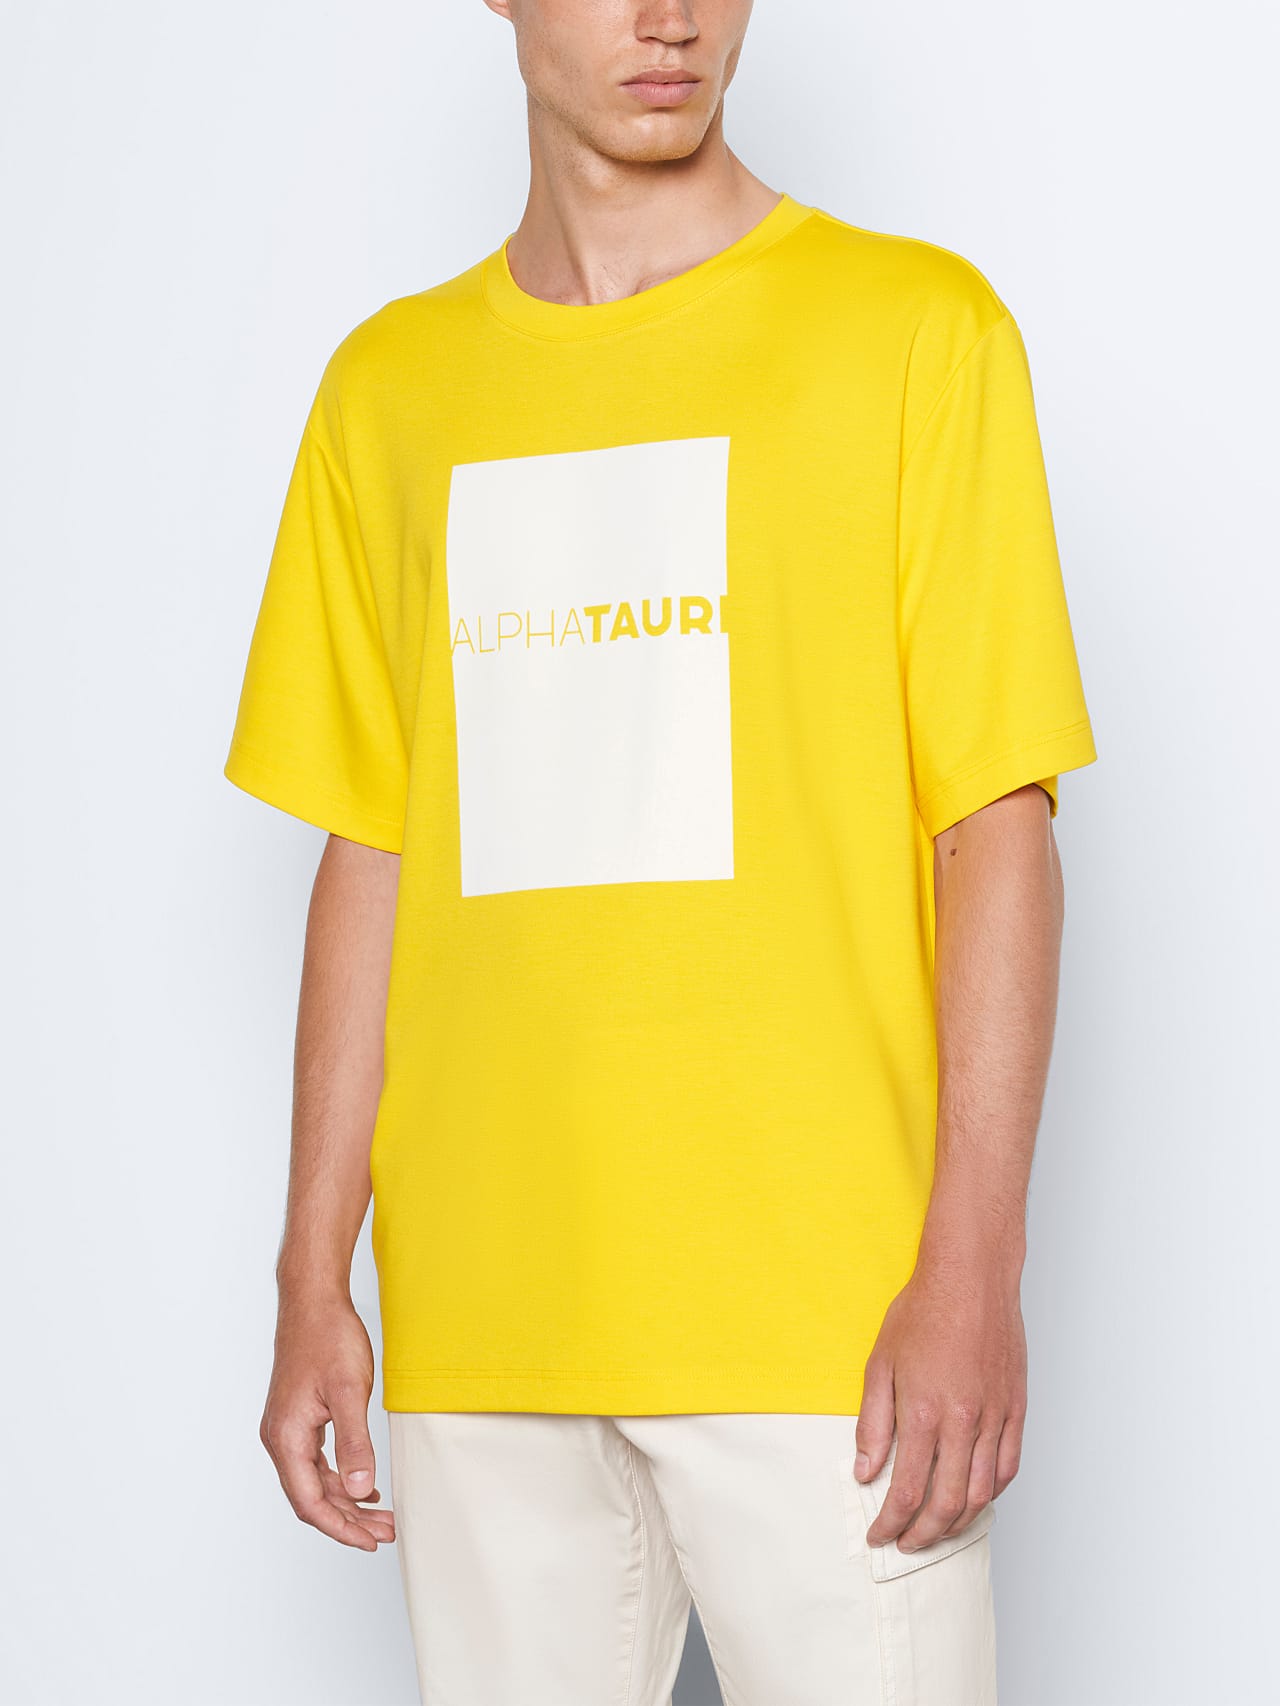 AlphaTauri | JAHEV V1.Y5.02 | Relaxed Logo T-Shirt in yellow for Men